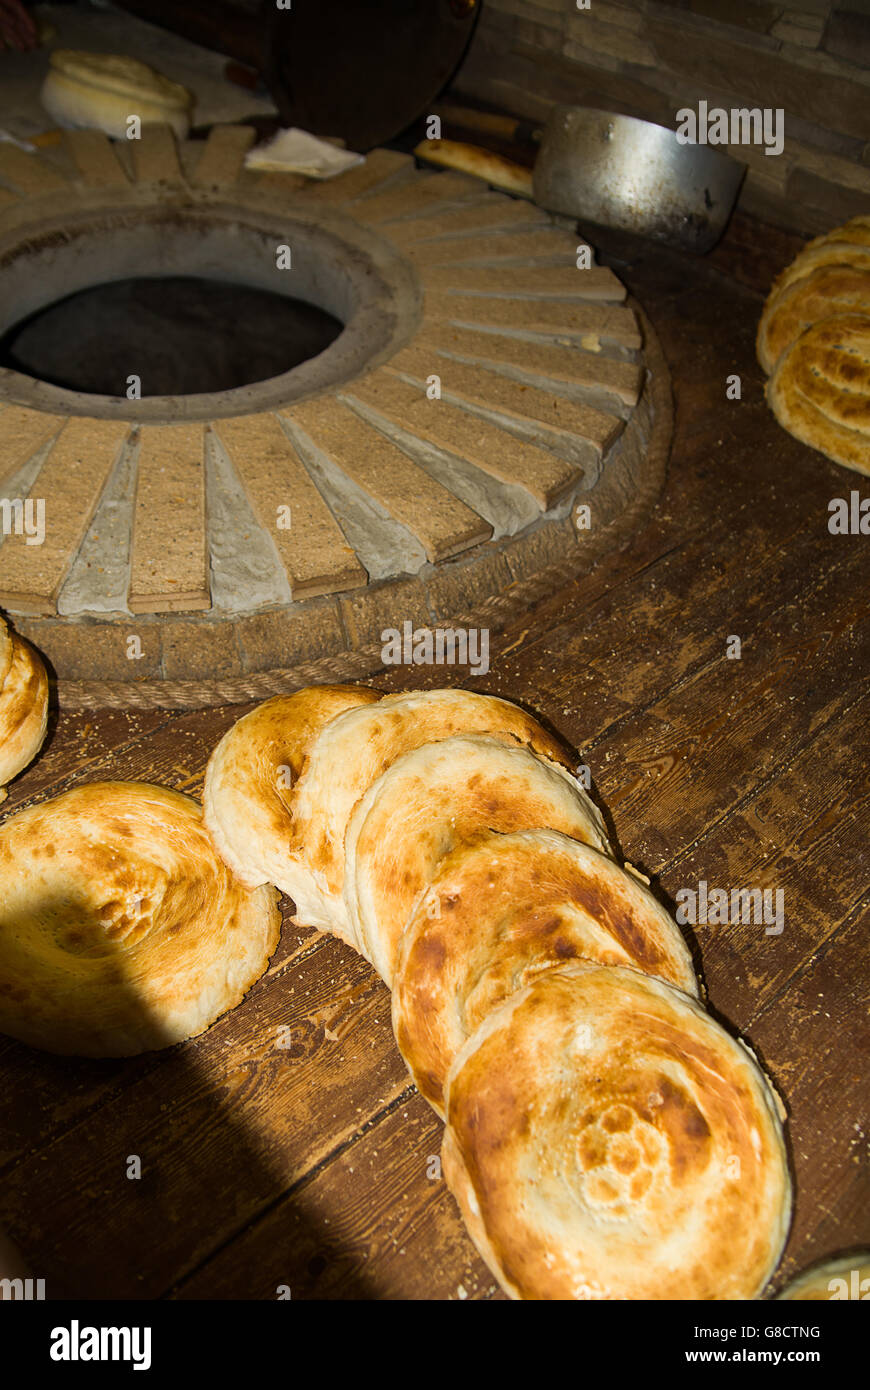 A few fresh-baked loaves of bread are next to the stove. Stock Photo